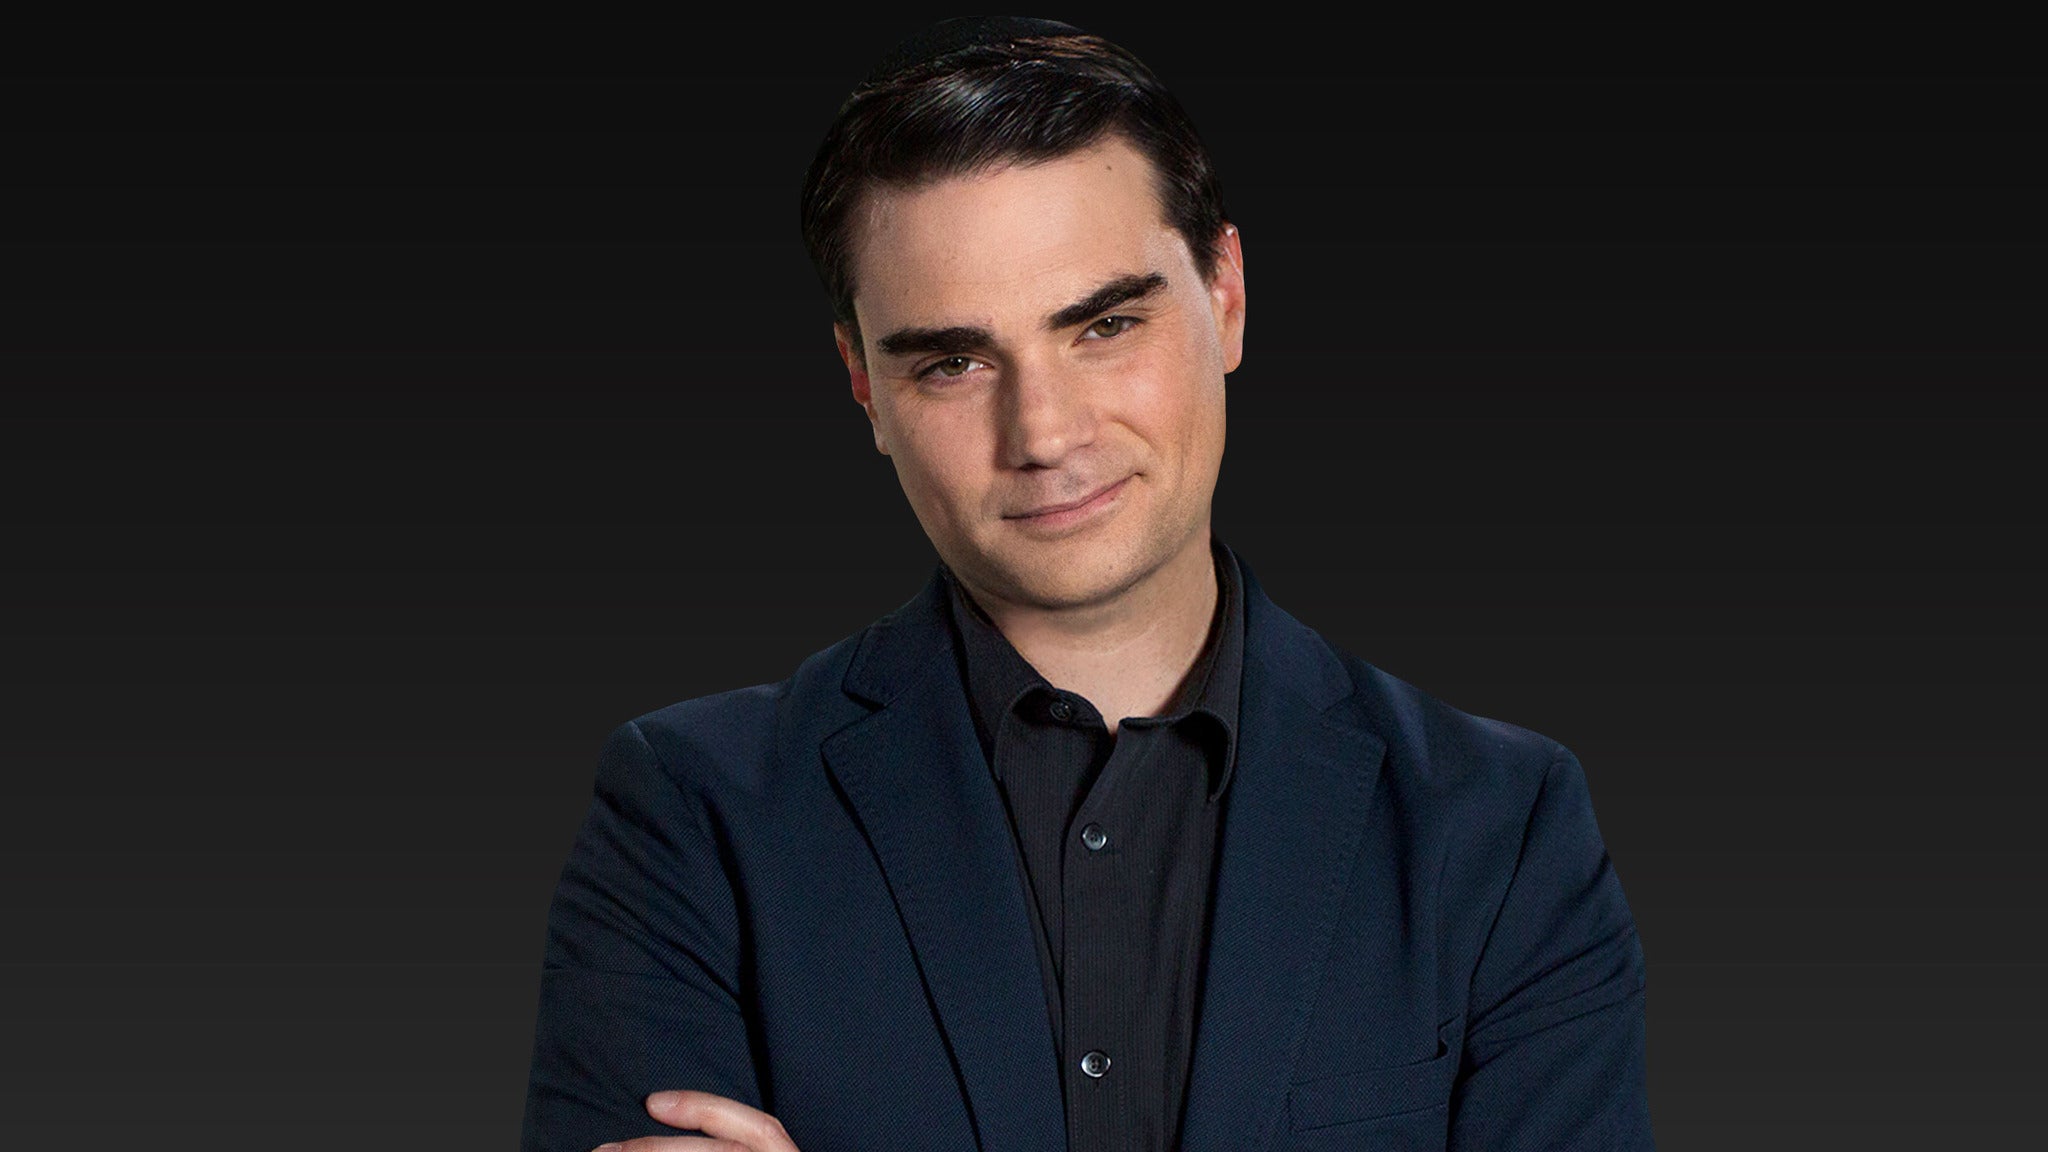 Ben Shapiro: Daily Wire Backstage Live W/ Jeremy, Michael & Andrew in Long Beach promo photo for Live Nation Mobile App presale offer code